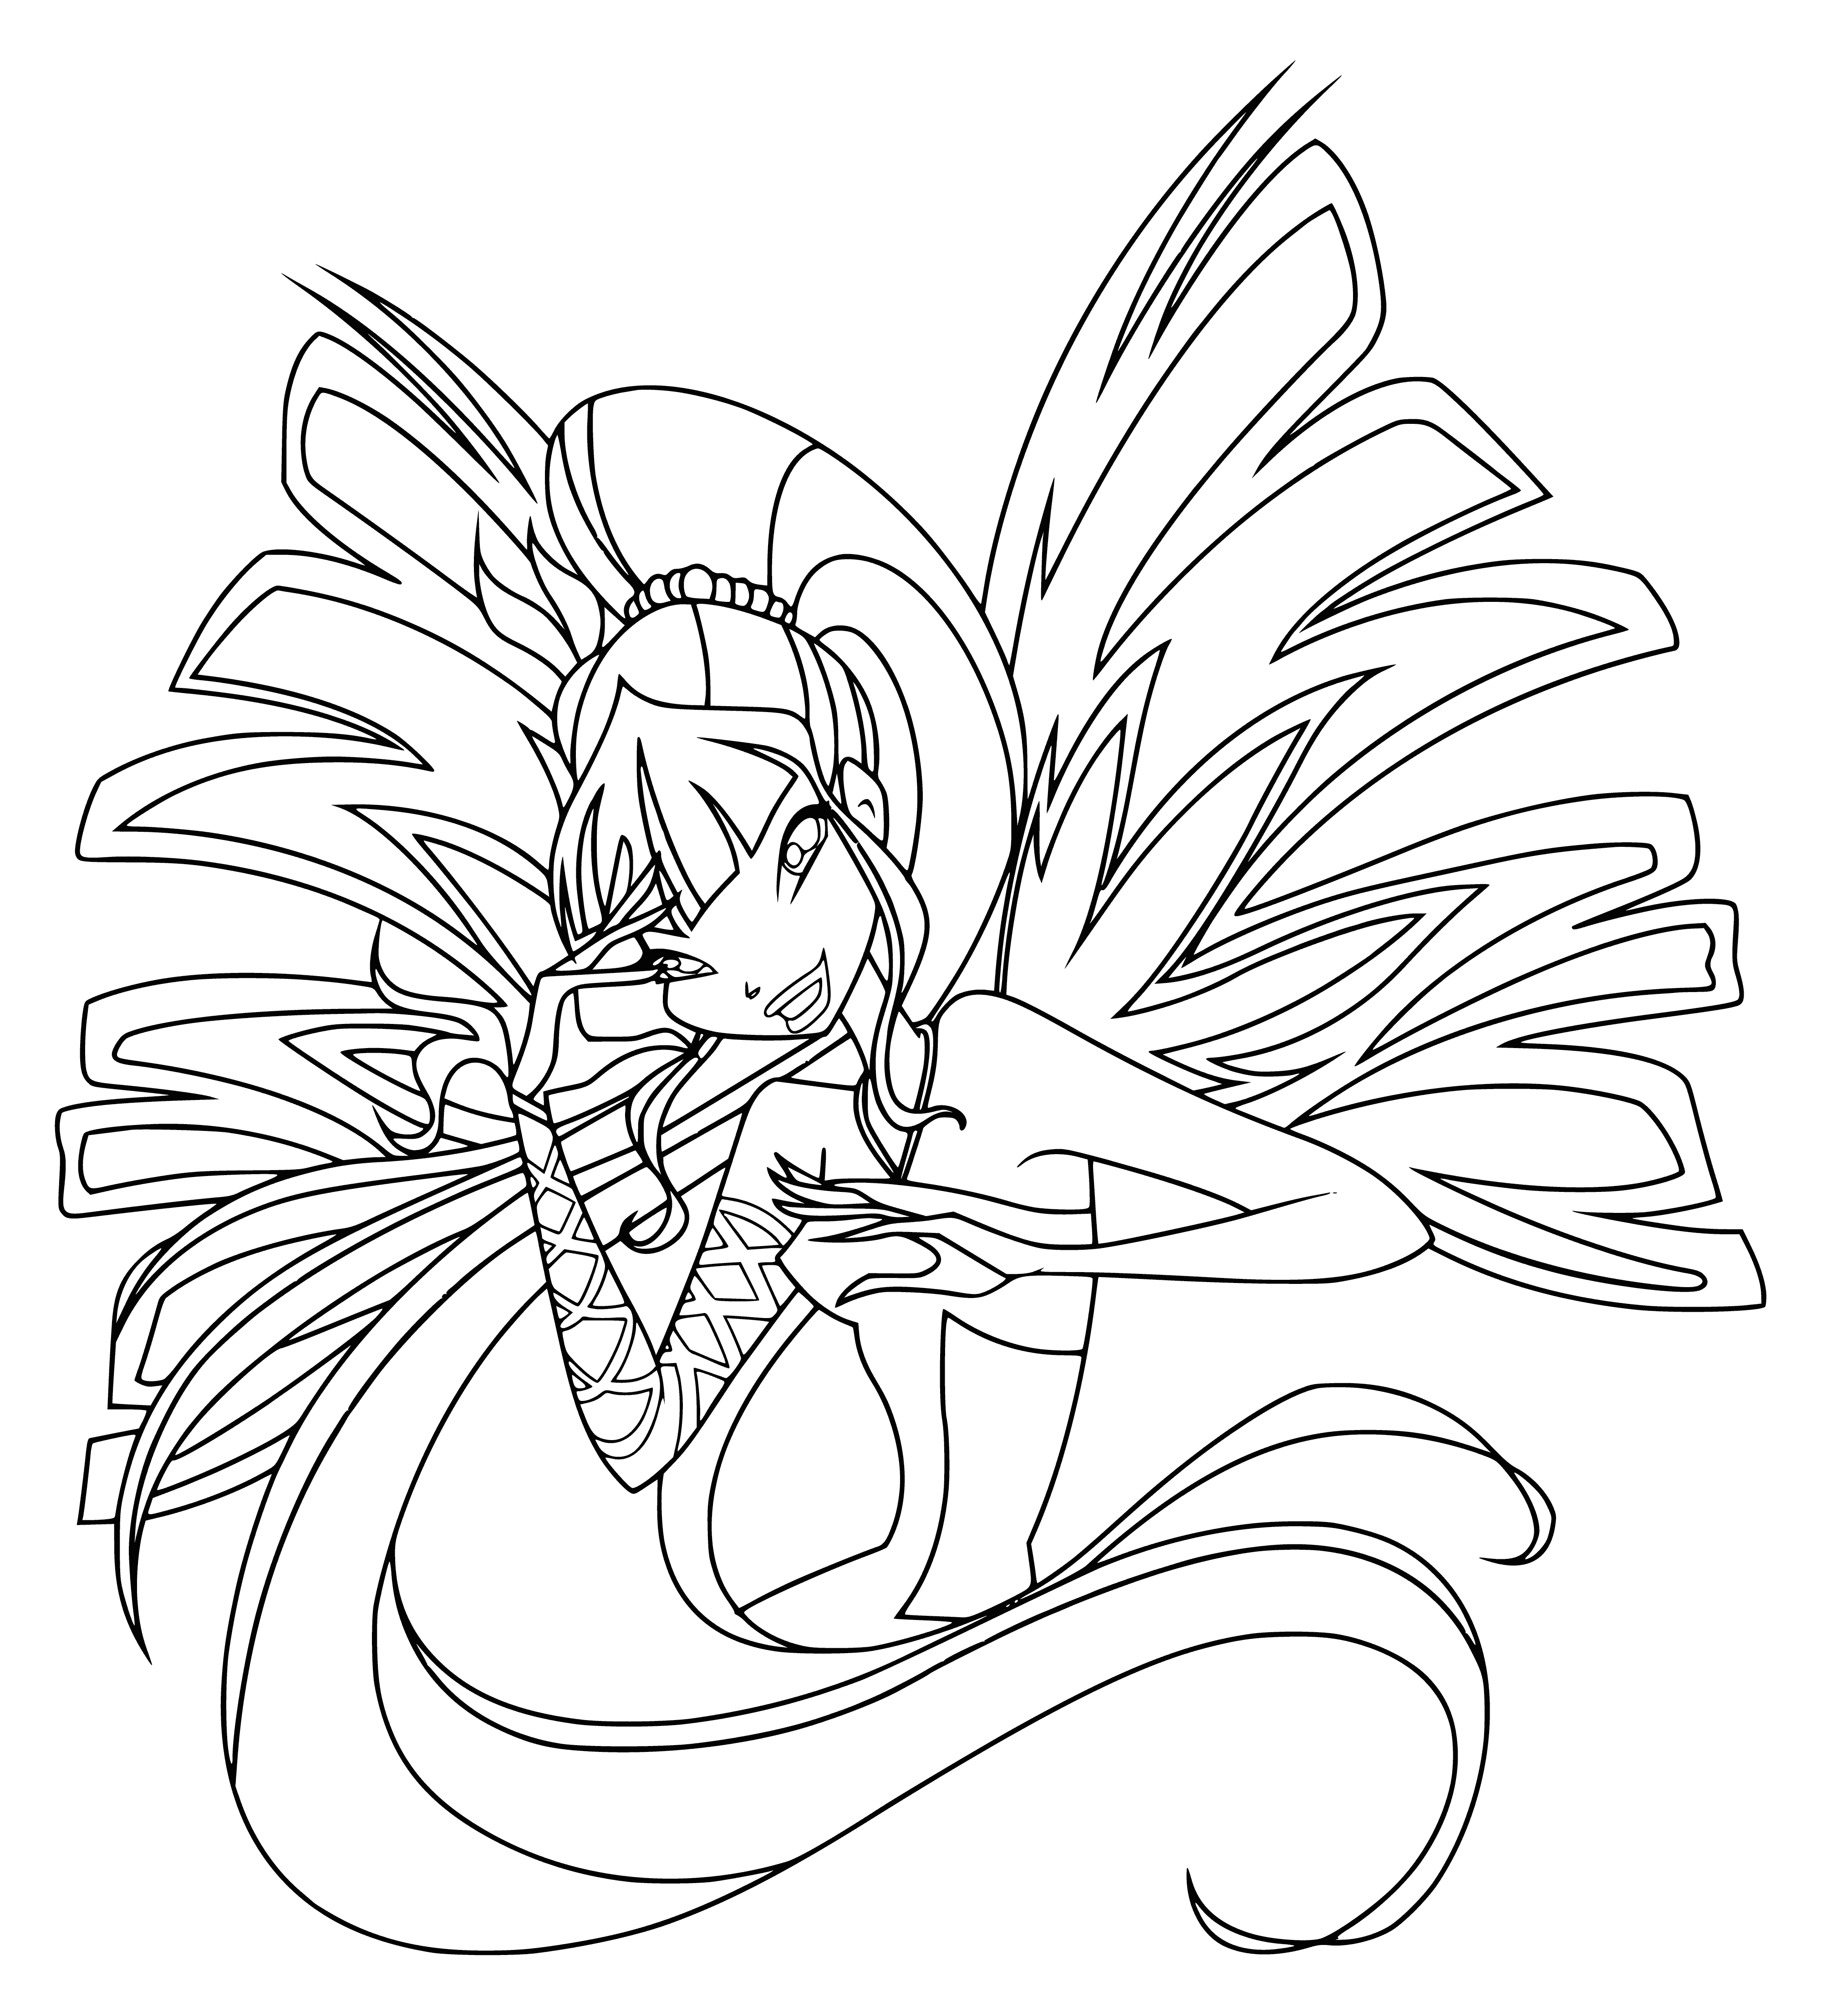 coloring page: Fairy-like creature holds staff with crescent moon in one hand and a globe of light in the other, atop a billowing gown and delicate wings. #fairytale